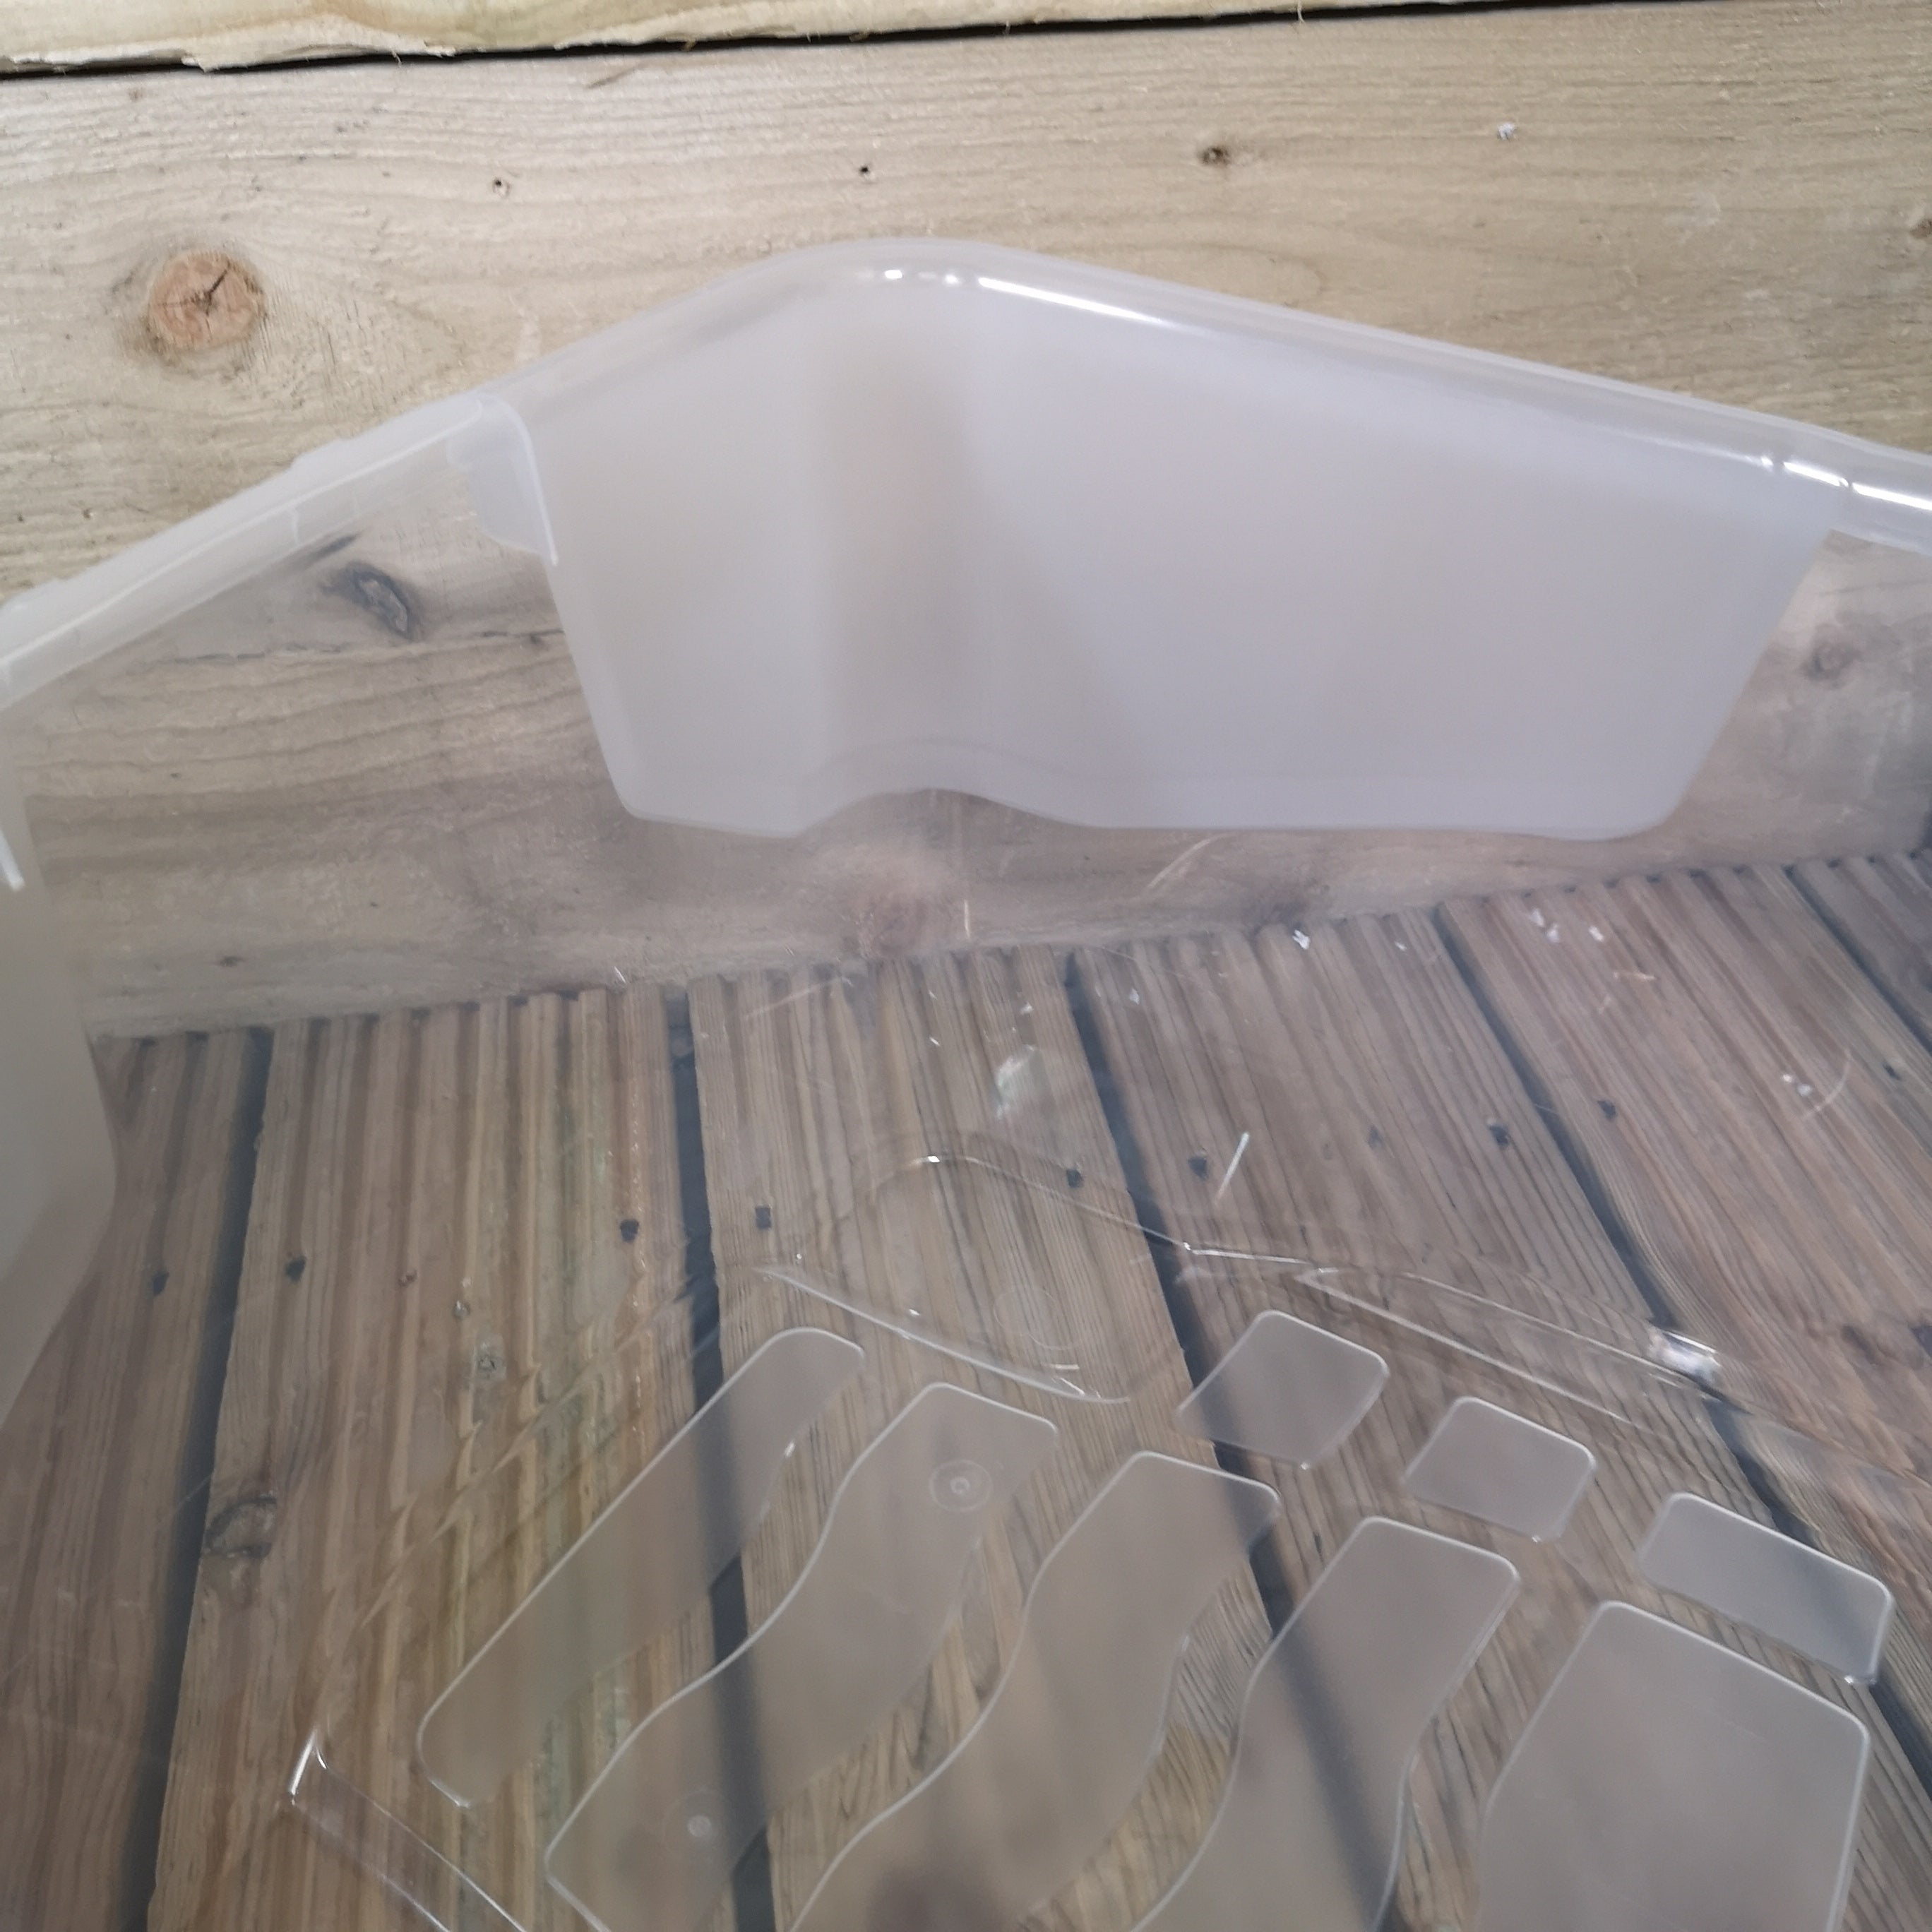 2 x 42L Clear Storage Box with Black Lid, Stackable and Nestable Design Storage Solution